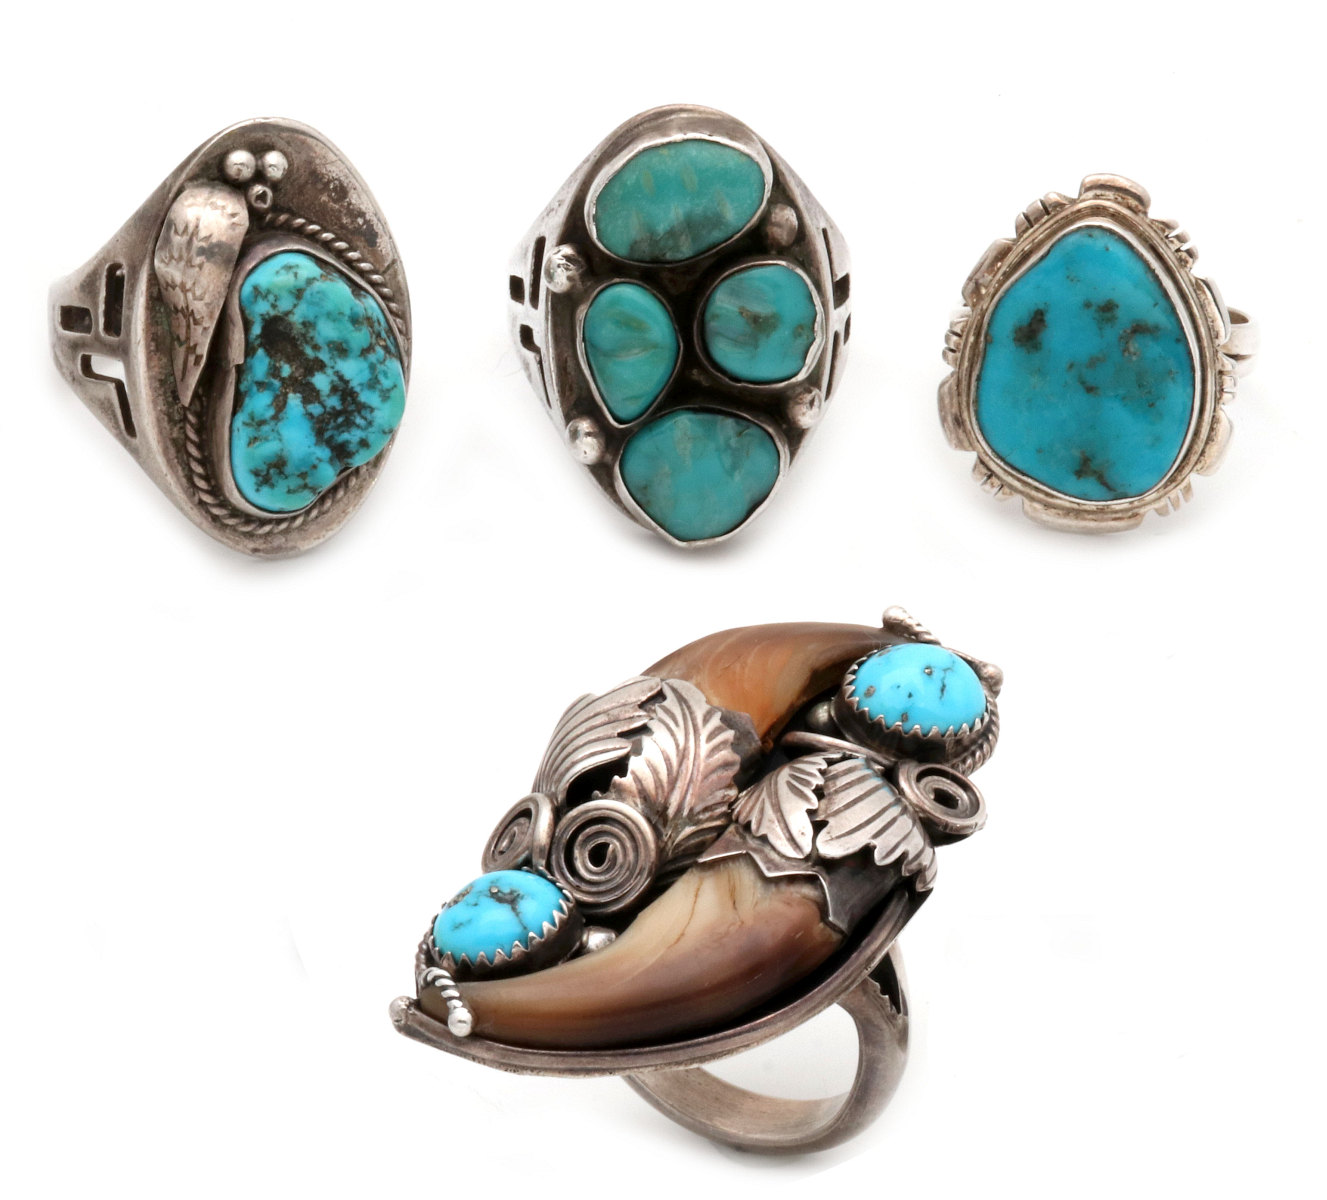 FOUR VINTAGE NAVAJO INDIAN STERLING AND TURQUOISE RINGS